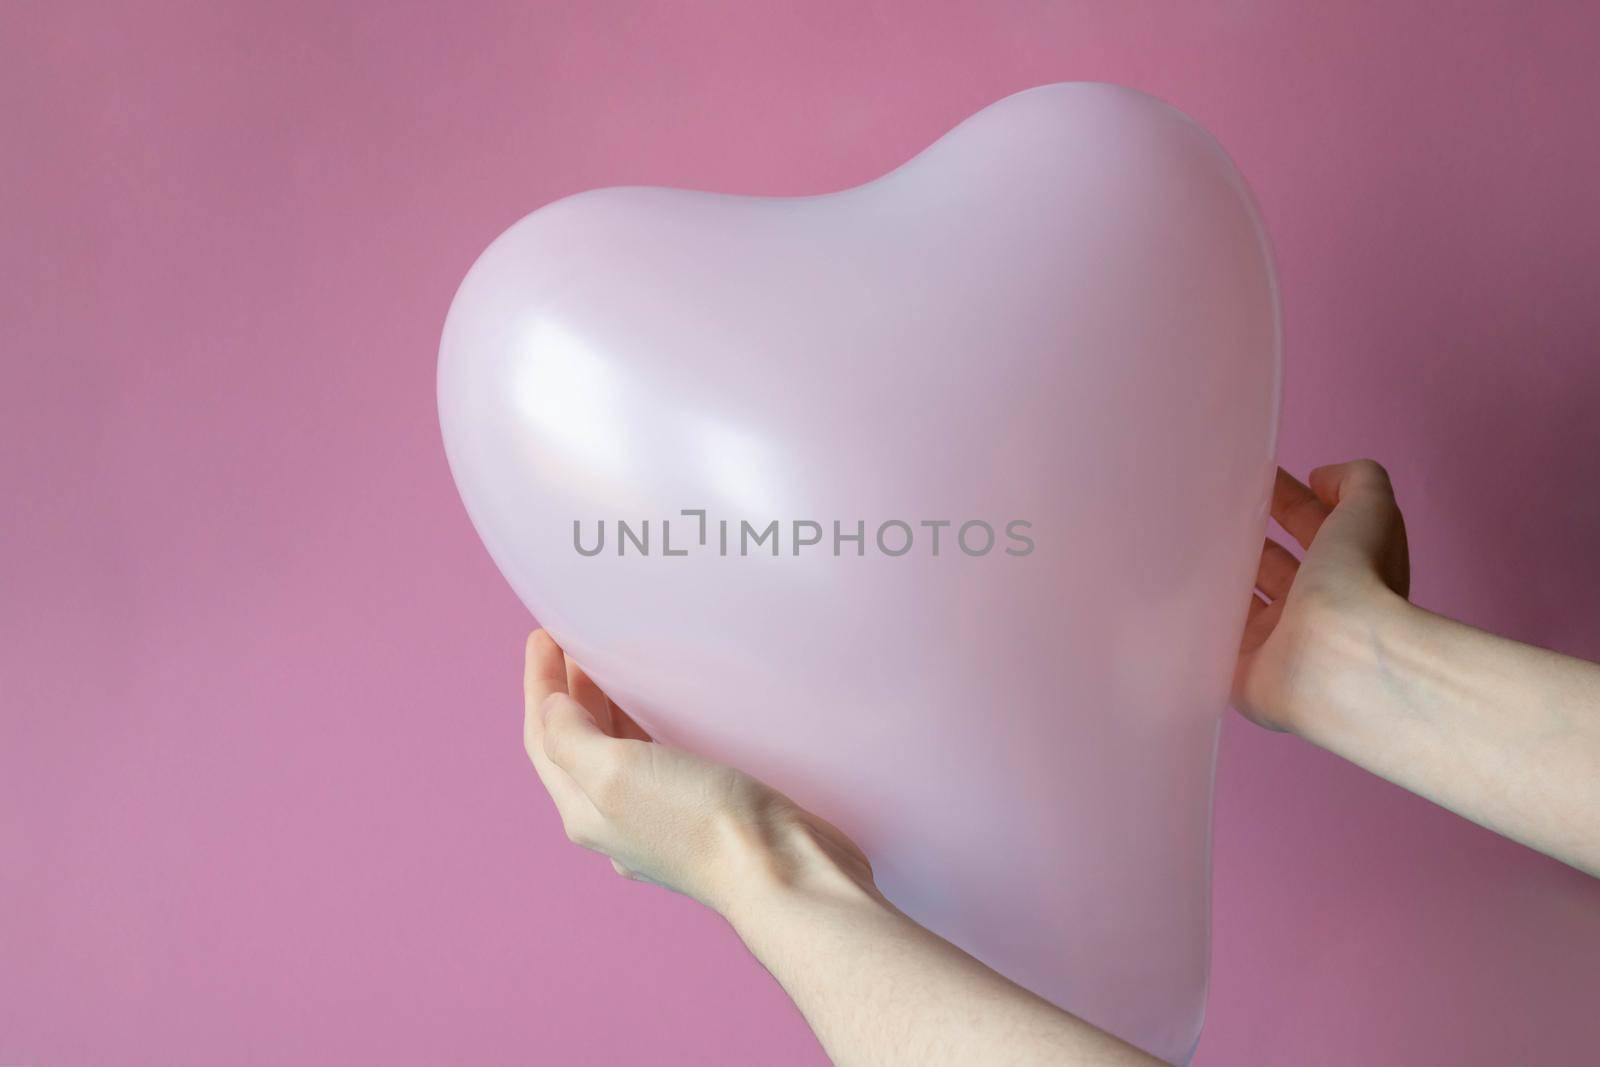 Women's hands hold a pink ball in the shape of a heart, highlighted on a pink background.